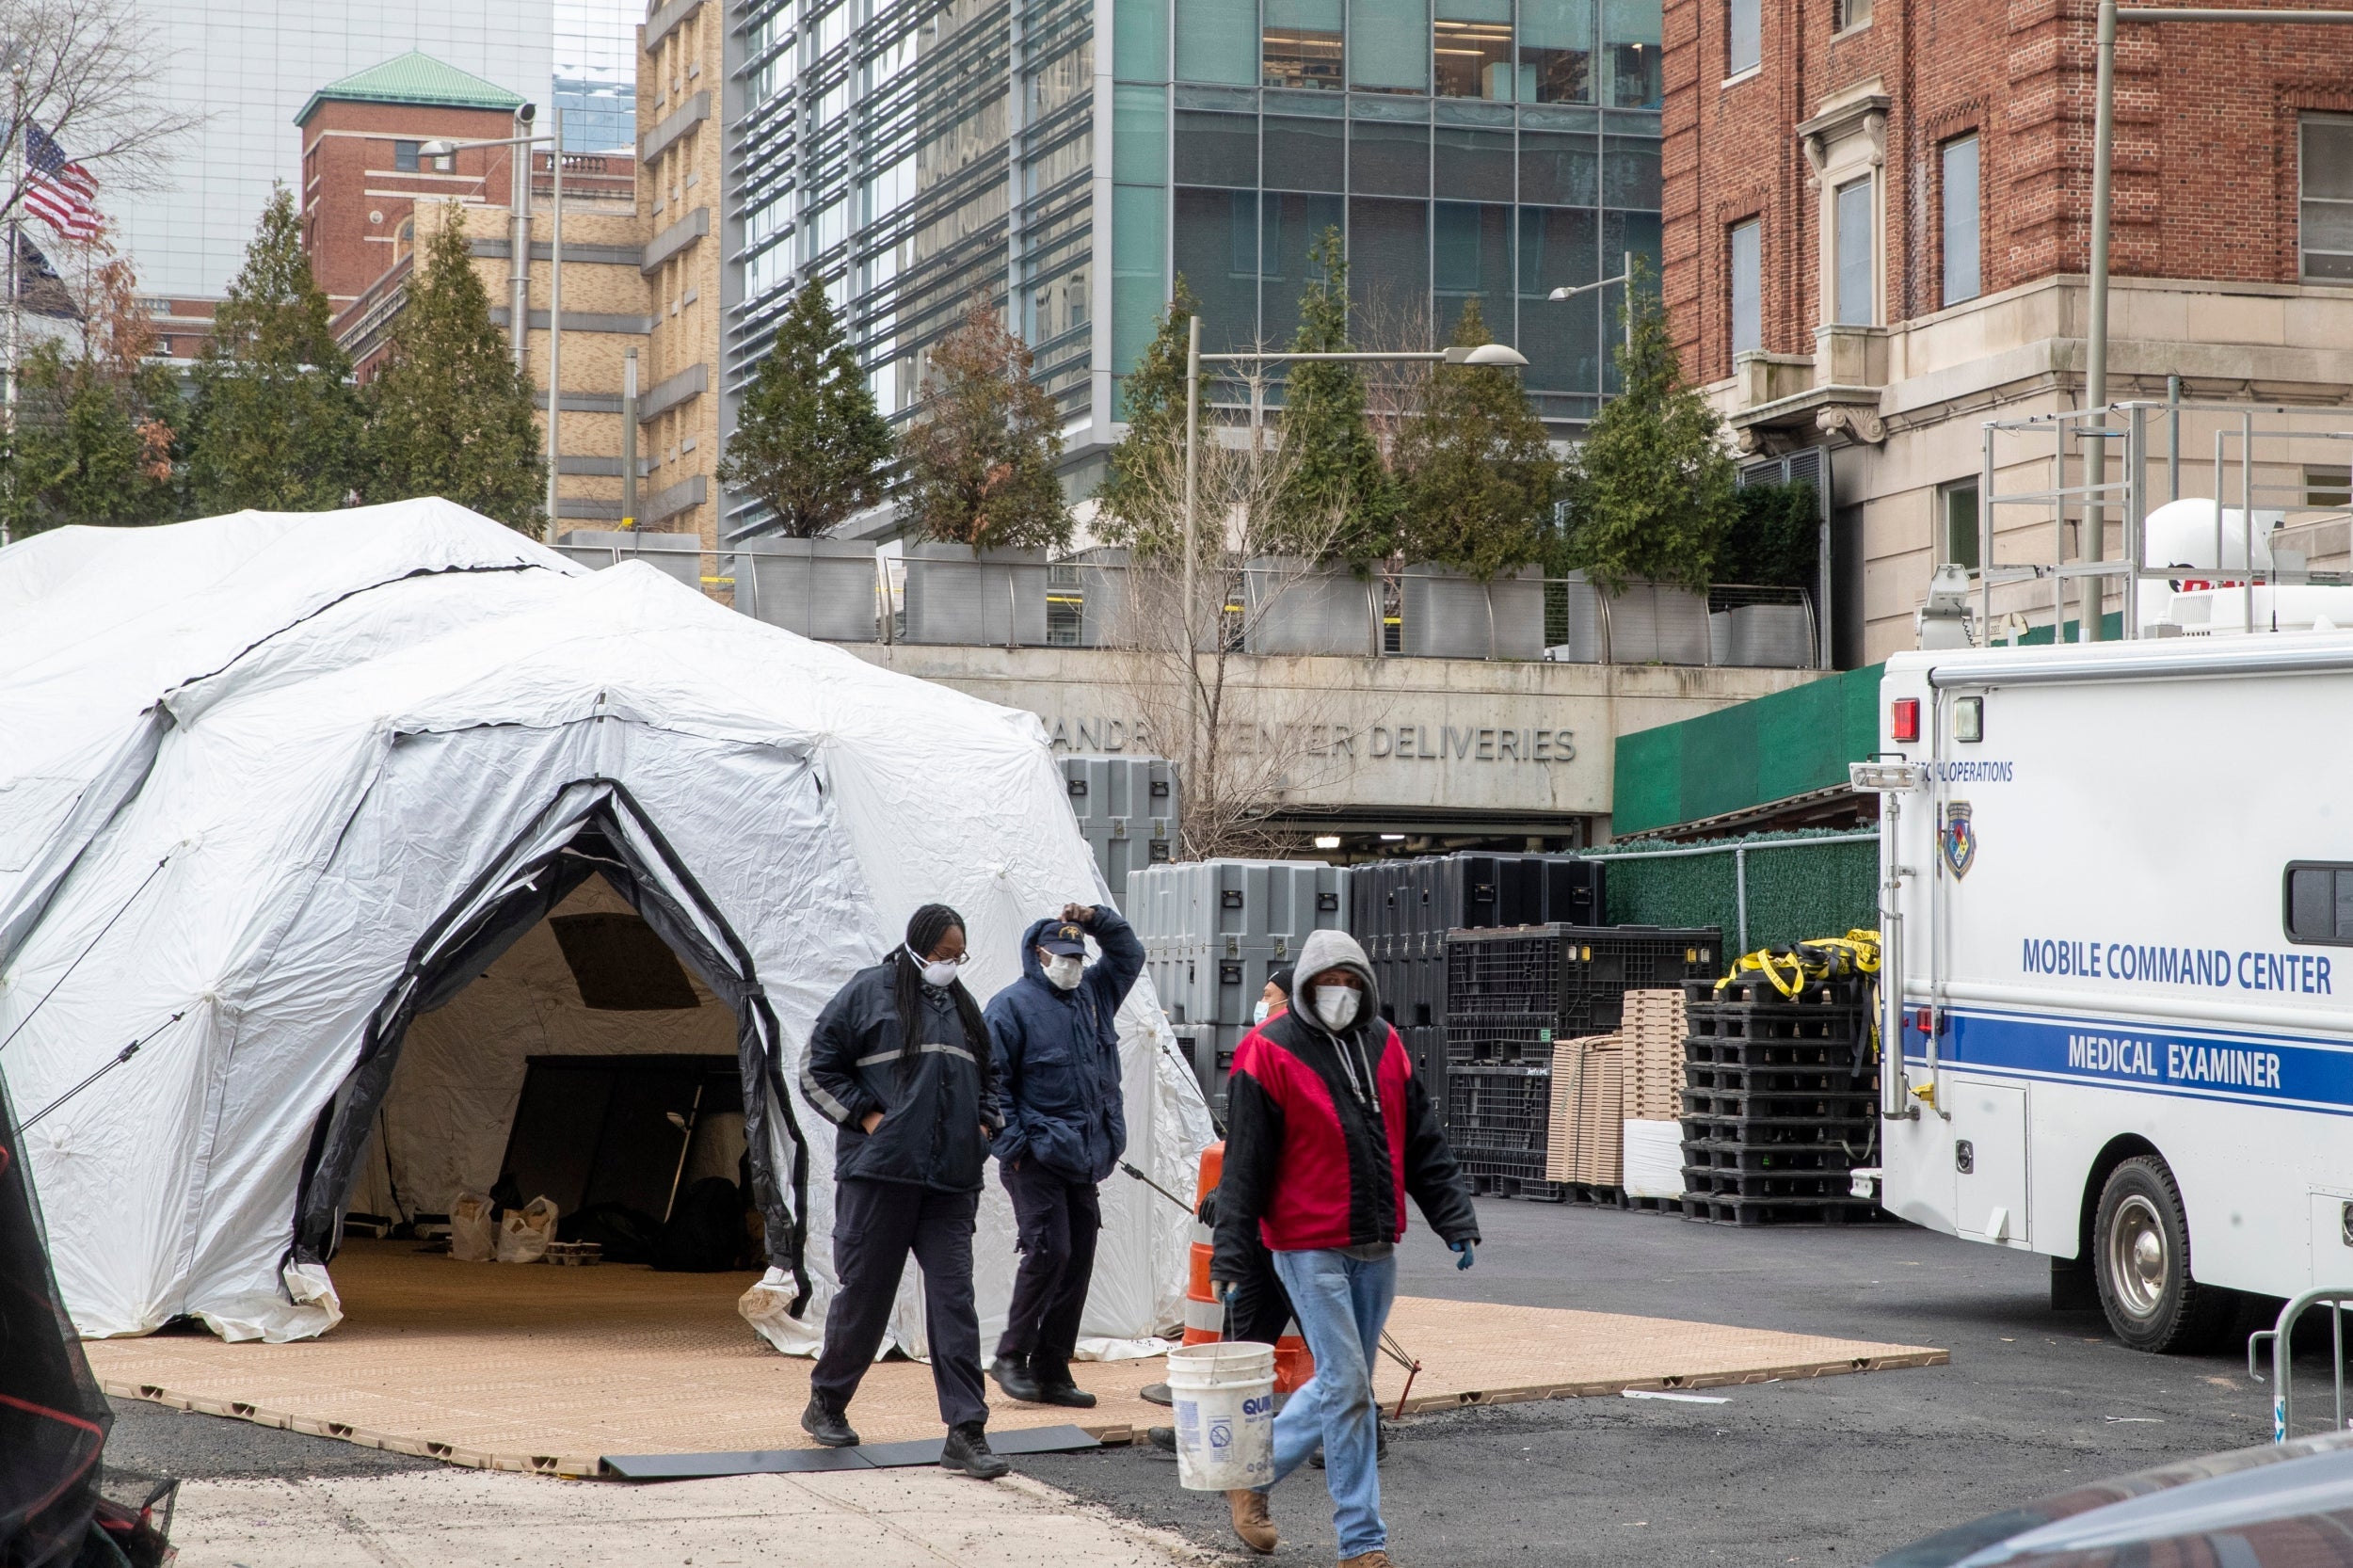 Medical Examiner personnel and construction workers are seen at the site of a makeshift morgue being built in New York, Wednesday, March 25, 2020.